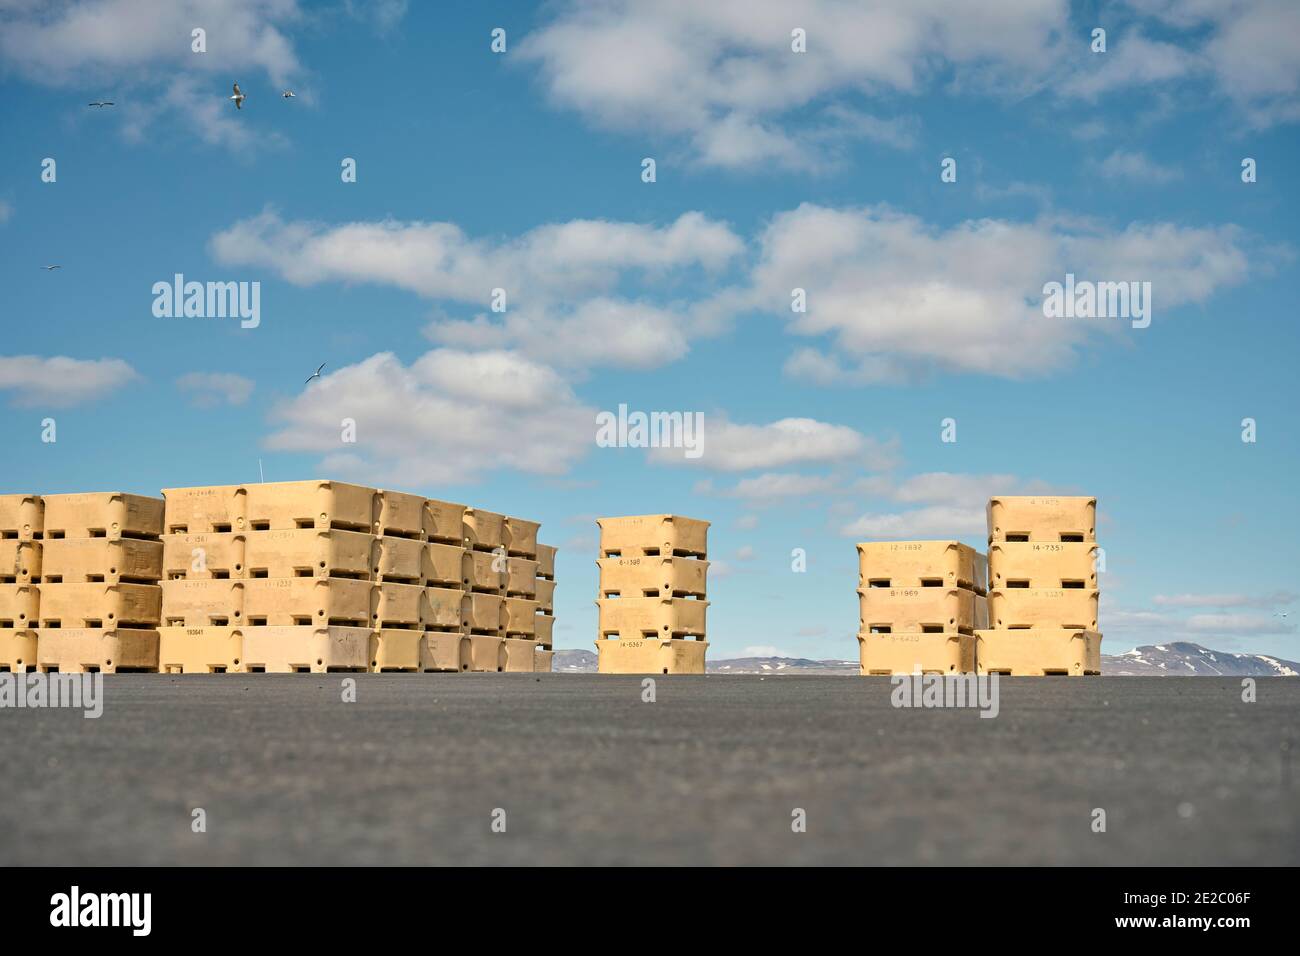 Stacks of fish storage containers stacked on ground against cloudy blue sky on sunny day in countryside Stock Photo